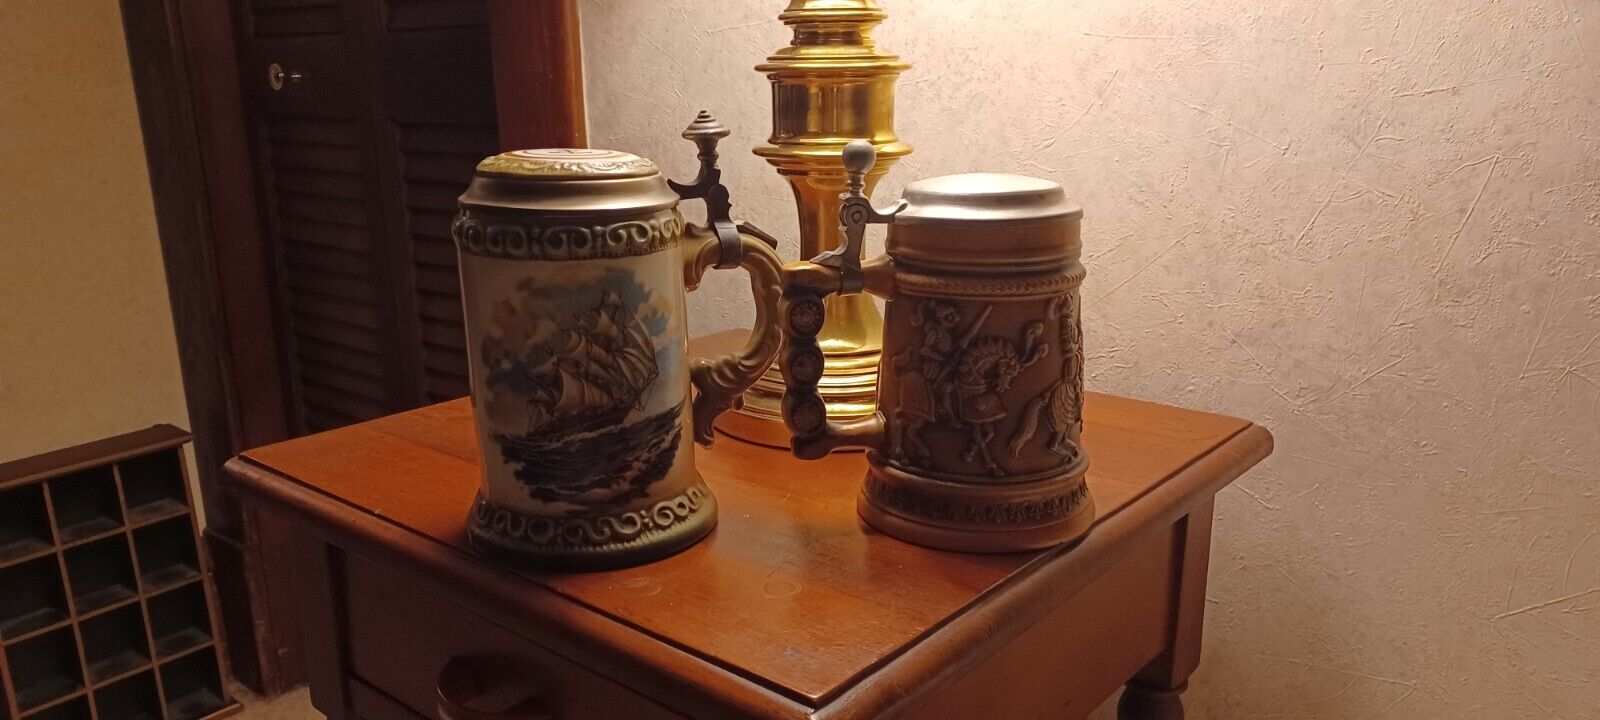 LOT OF TWO VINTAGE BEER STEINS WITH SHIPS AND MEDIEVAL FIGURES